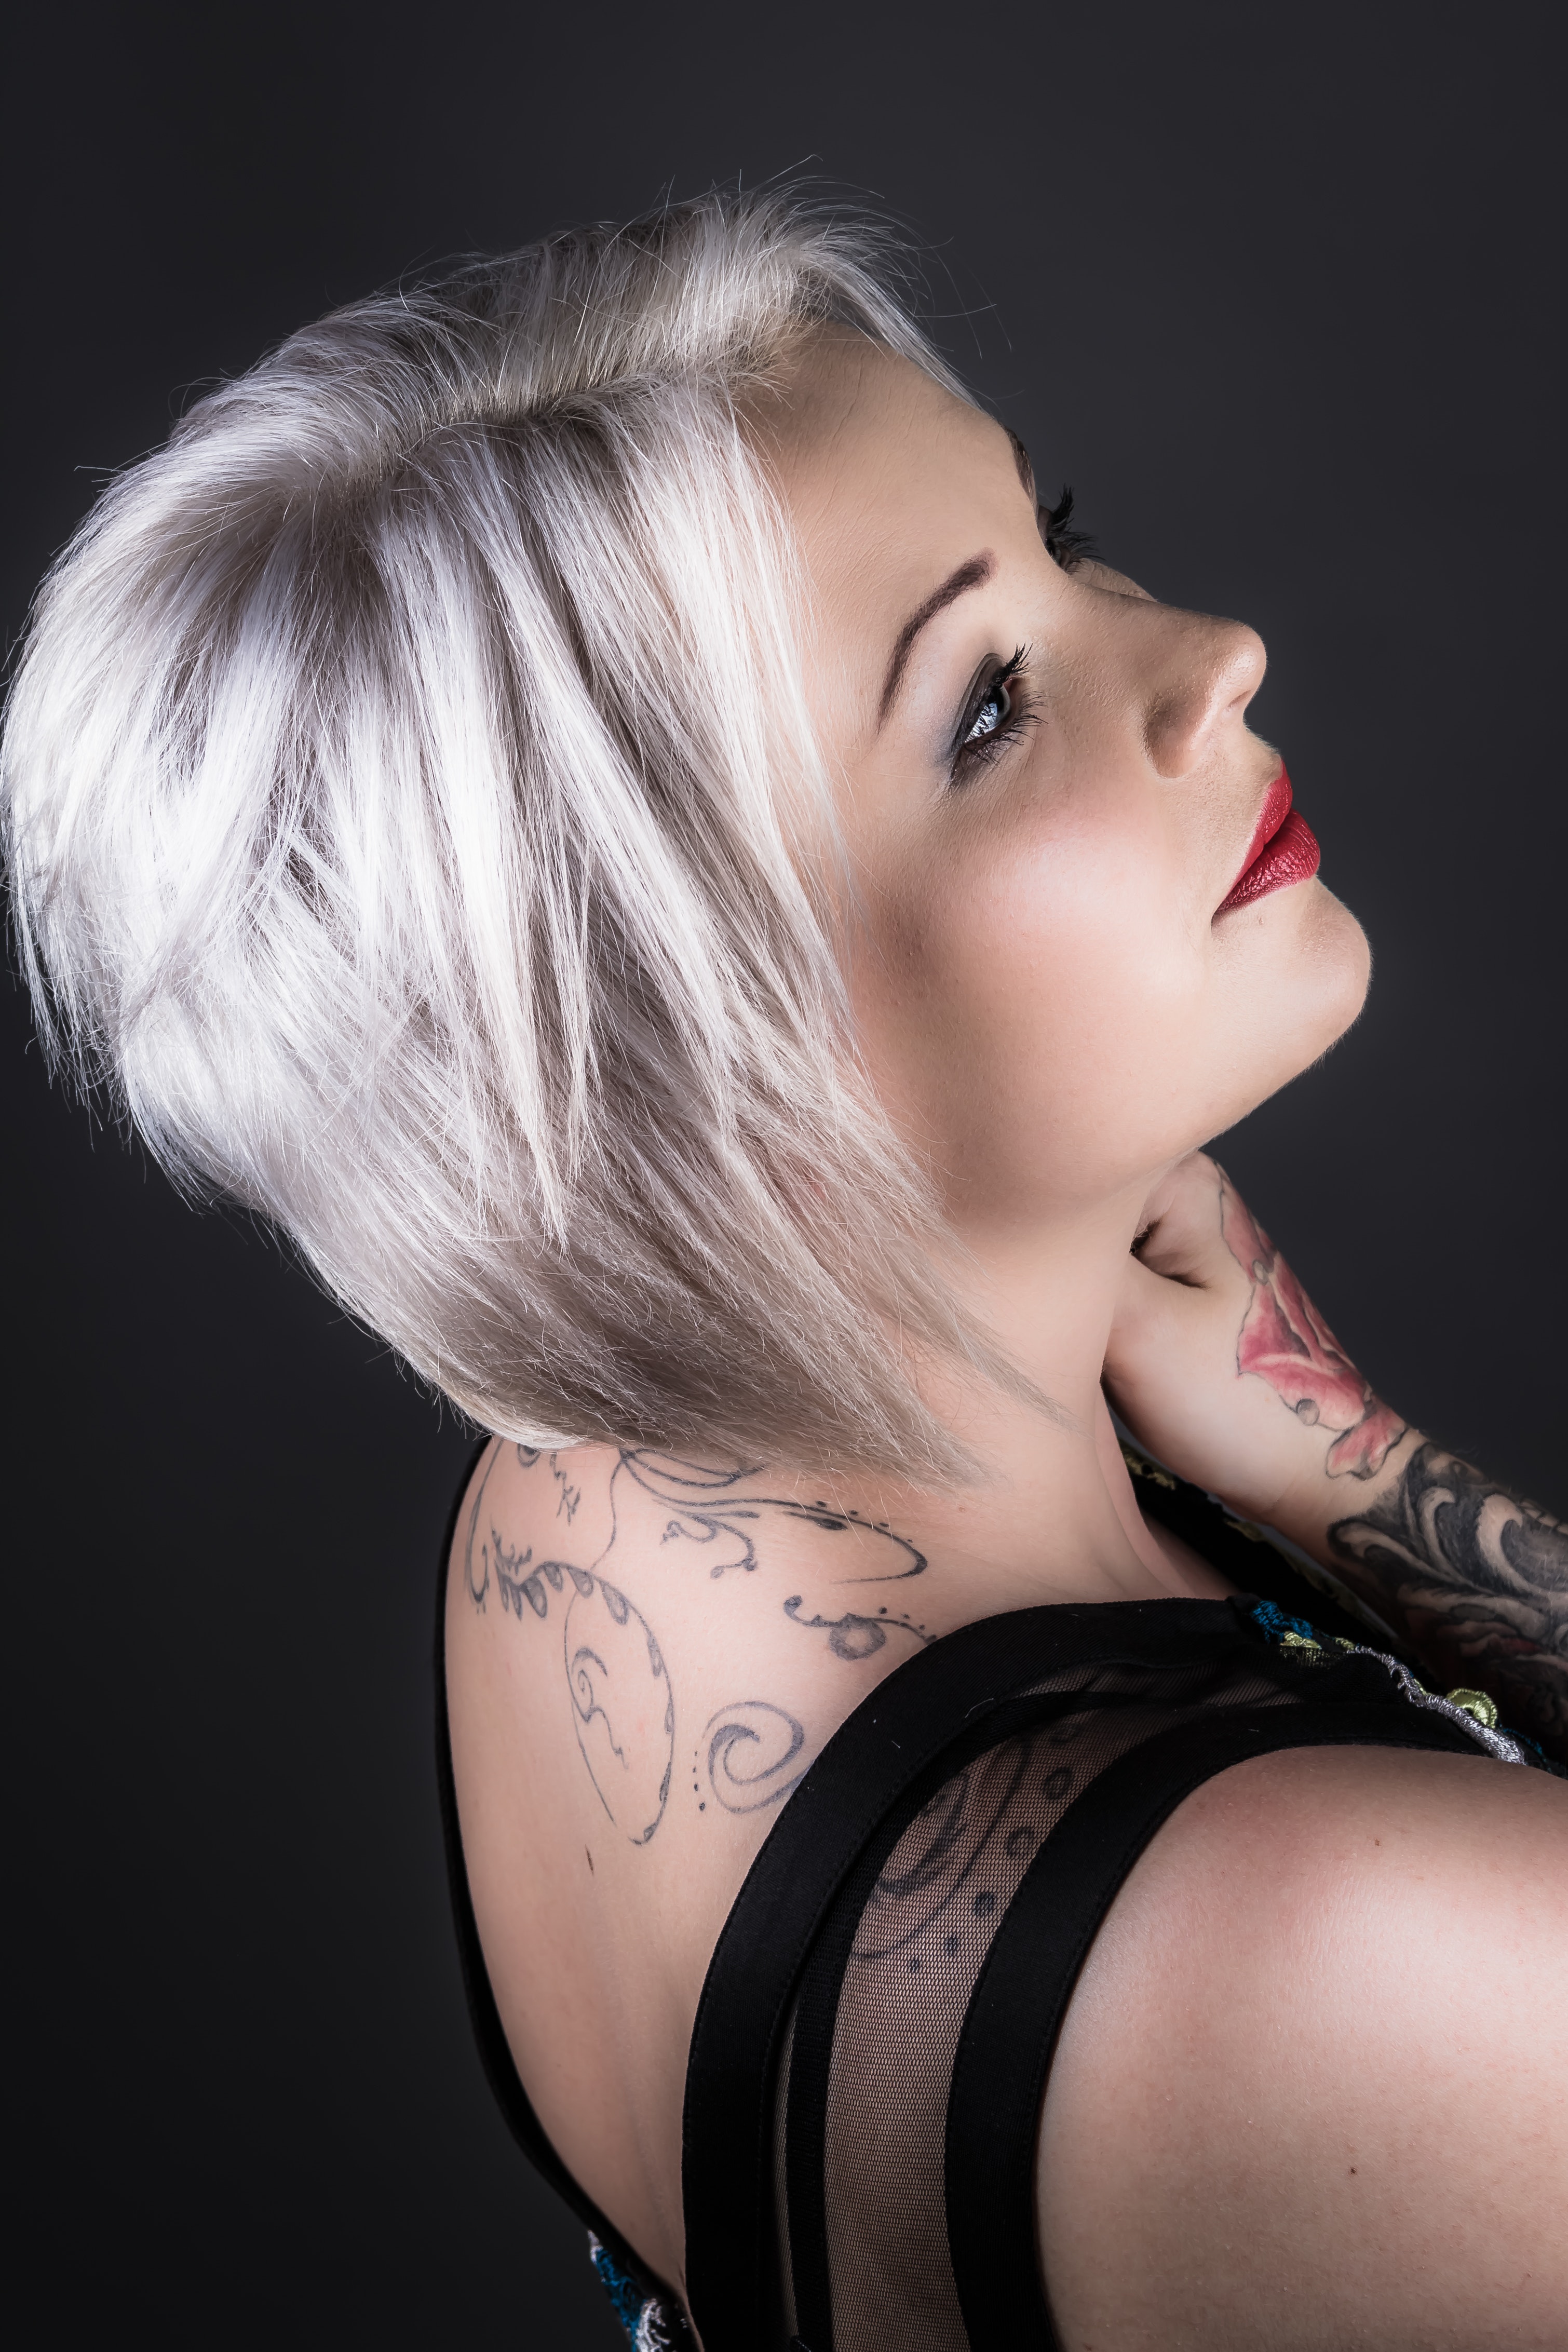 Woman wearing black shirt with tattoo and red lipstick photo